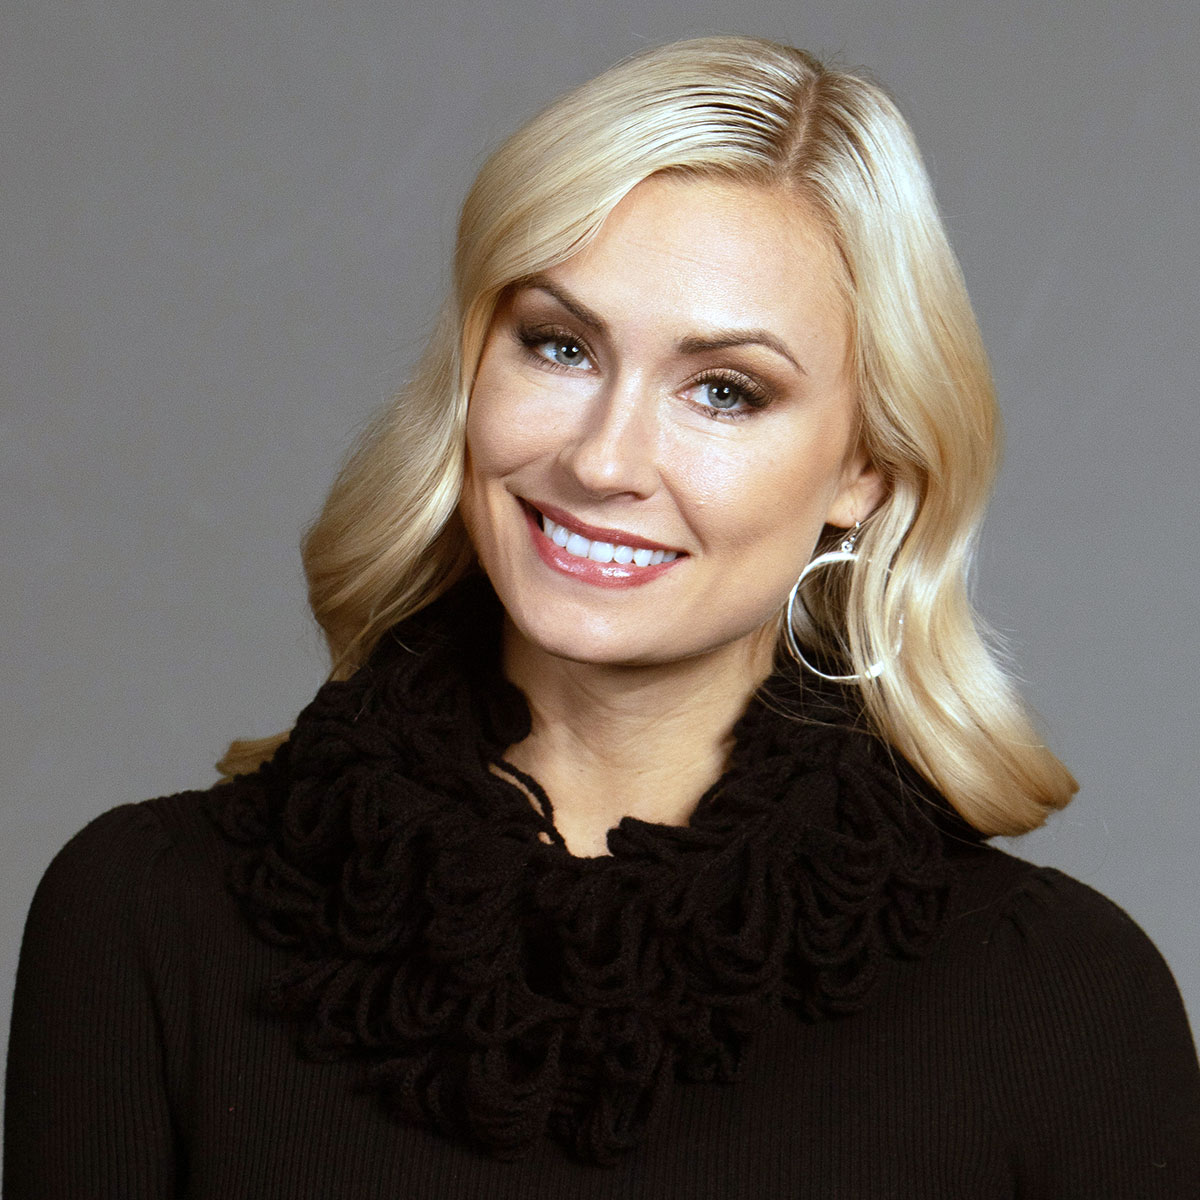 b70 INFINITY SCARF LOOPY BLACK 8IN X 52IN KNIT - Click Image to Close